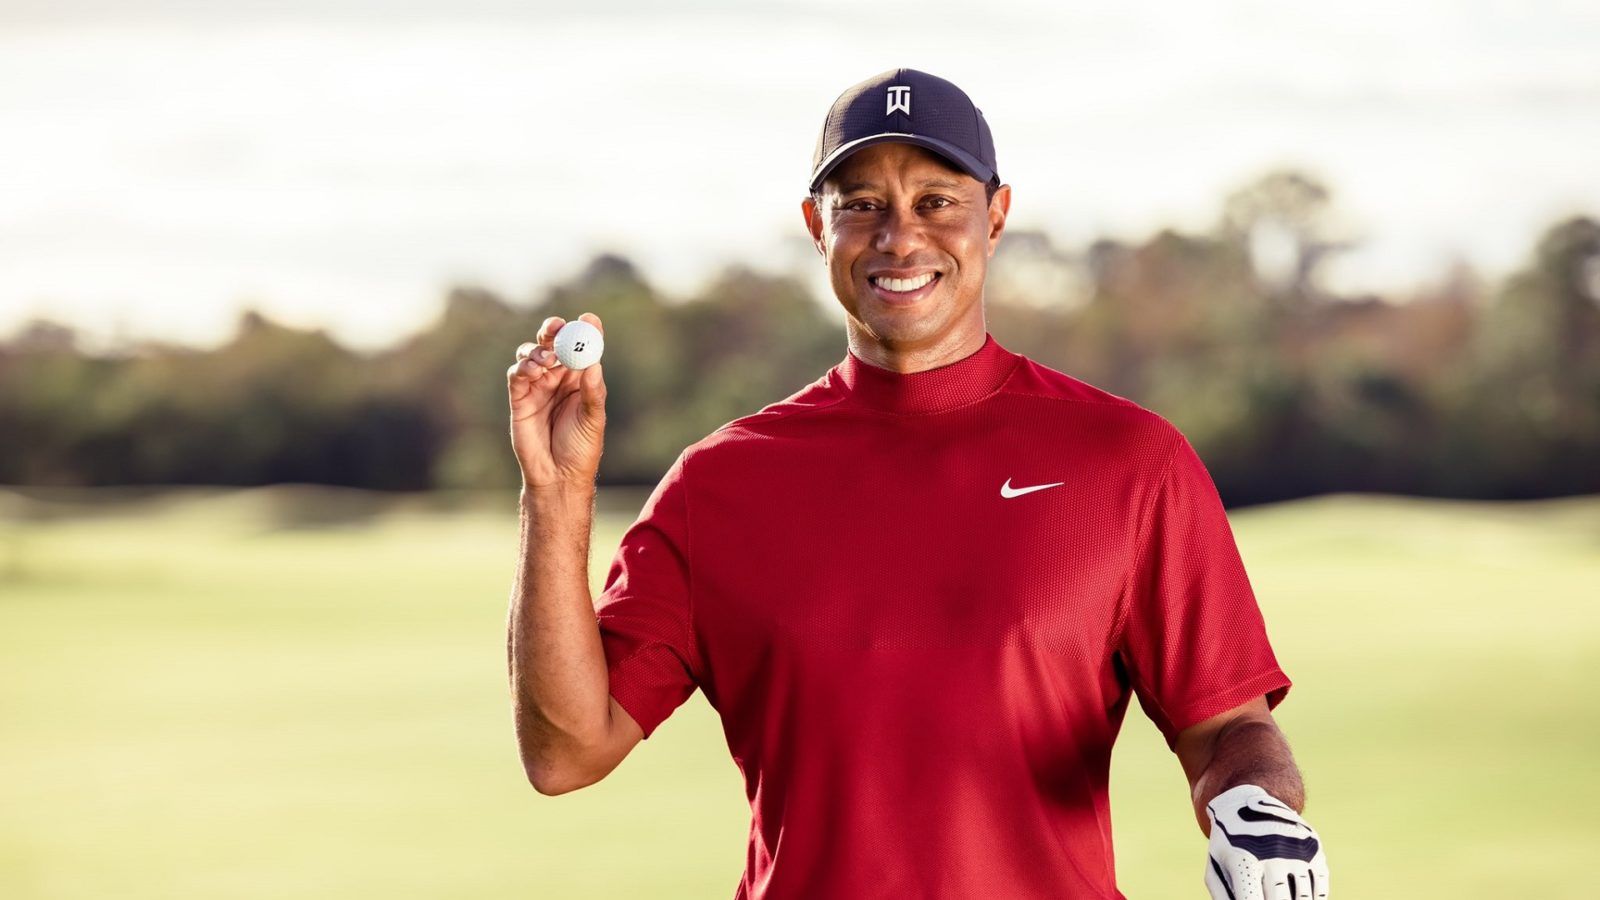 Forbes names Tiger Woods as the third billionaire from the sports world